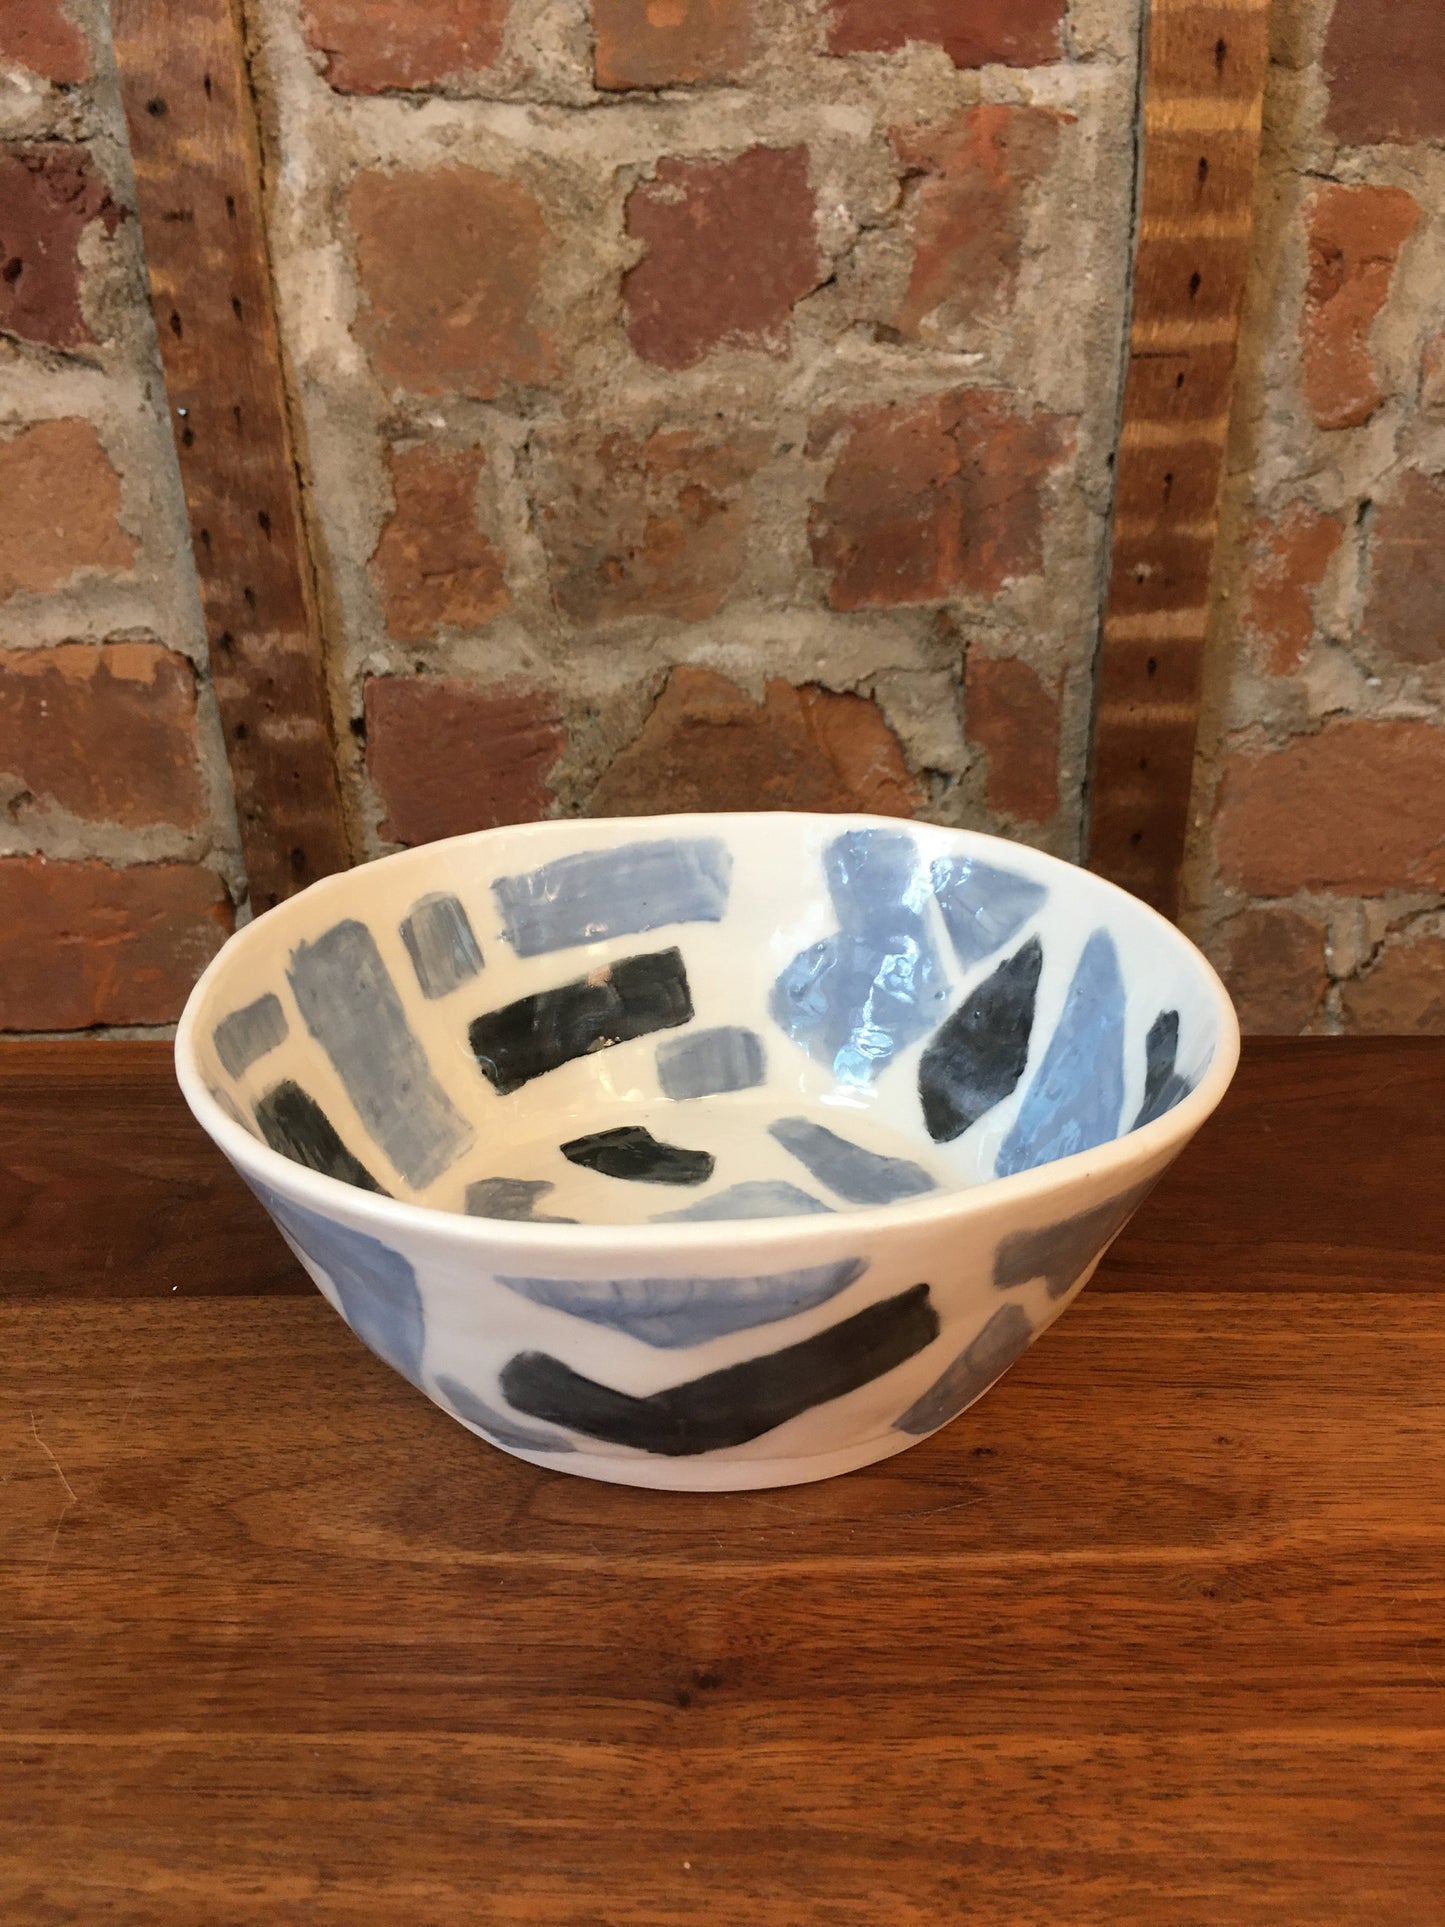 Porcelain Bowl with Dark and Light Blue Geometric Shapes